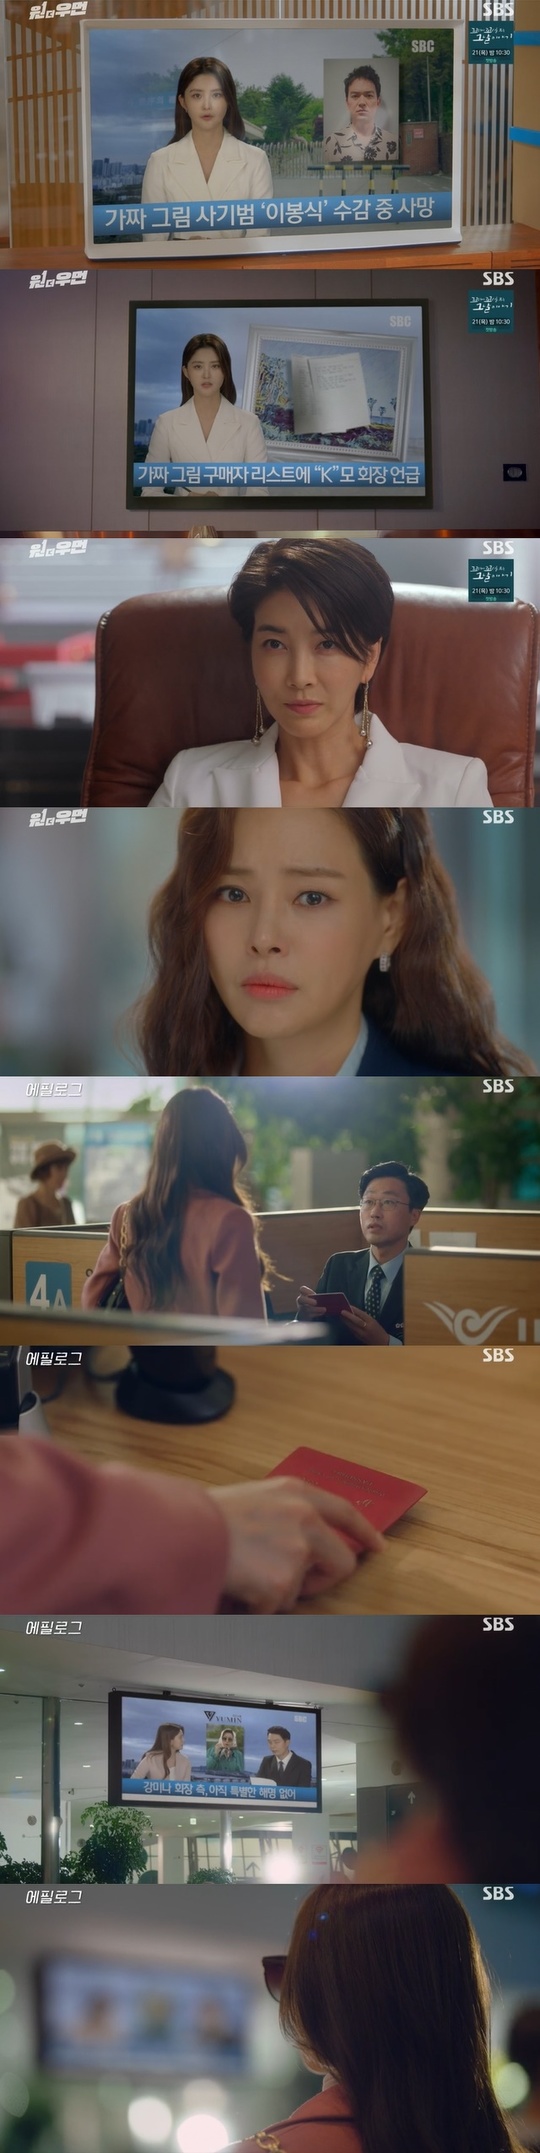 It is noteworthy whether the person who will save Lee Ha-nui, who is in Danger, will become a chaebol Lee Ha-nui.In the 9th episode of SBS gilt drama one the woman (played by Kim Yoon and directed by Choi Young-hoon), which was broadcast on October 15, Danger of the supporting actor (Lee Ha-nui) was drawn, who headed back to the ground with the high ground in front of him due to the death of Lee Bong-sik (played by Kim Jae-young).On this day, Cho Yeon-ju imprisoned Lee Bong-sik in a detention center where his people were laid down when he did not easily put out the list.The supporting actor monitored the safety and nonsense of Lee Bong-sik through the gangsters he usually knew.However, the counterattack was also tough: Han Sung-hye (Jin Seo-yeon) also put the beaking gangster in the same room as Lee Bong-sik to tighten his breath.Lee Bong-sik, who was worried that he might be killed, tried to contact the supporting actor, but he could not reach it because the supporting actor blocked all external contacts to avoid contact with Han Sung-hye.Lee Bong-sik tried to go to the detention center by using a trick. Lee Bong-sik secretly obtained diarrhea medication and took a large amount of it to get to the hospital.However, Lee Bong-sik felt the abnormal symptoms of the head pinging instead of the toilet signal, and tried to put his fingers in his throat with an ominous feeling and vomit the drug.All this was the way to death: Lee Bong-sik, who was confined to solitary confinement for this, was disguised as extreme Choices by a person.In Lee Bong-siks pocket, a list of picture customers with the name of Lee Ha-nui, which Han Sung-hye had previously manipulated, was put in.Cho Yeon-ju, who reported on Lee Bong-siks death, insisted that Lee Bong-sik would not do extreme Choices.However, Ryu Seung-deok (Kim Won-hae), who was wary of supporting actors due to rumors of internal gunshots, ordered him to just cover the supporting actors.Lee Bong-siks death was a boon to Han Sung-hye instead.Han Sung-hye, who had been in the middle of the slope due to the demand for a re-examination of Yumin Hotel by Han Seung-wook (Lee Won-keun) and the rebuke of Han Young-sik (National Hwan), smiled at the moment when Han Seung-wook hurriedly left the meeting.If Kang Mi-na is summoned, there is an absolute impossible situation in which the prosecutors assistant actor must investigate the supporting actor disguised as Kang Mi-na. In the epilogue, a person who is presumed to be a person who can overturn all of these cases appeared.It was Kang Mi-na.